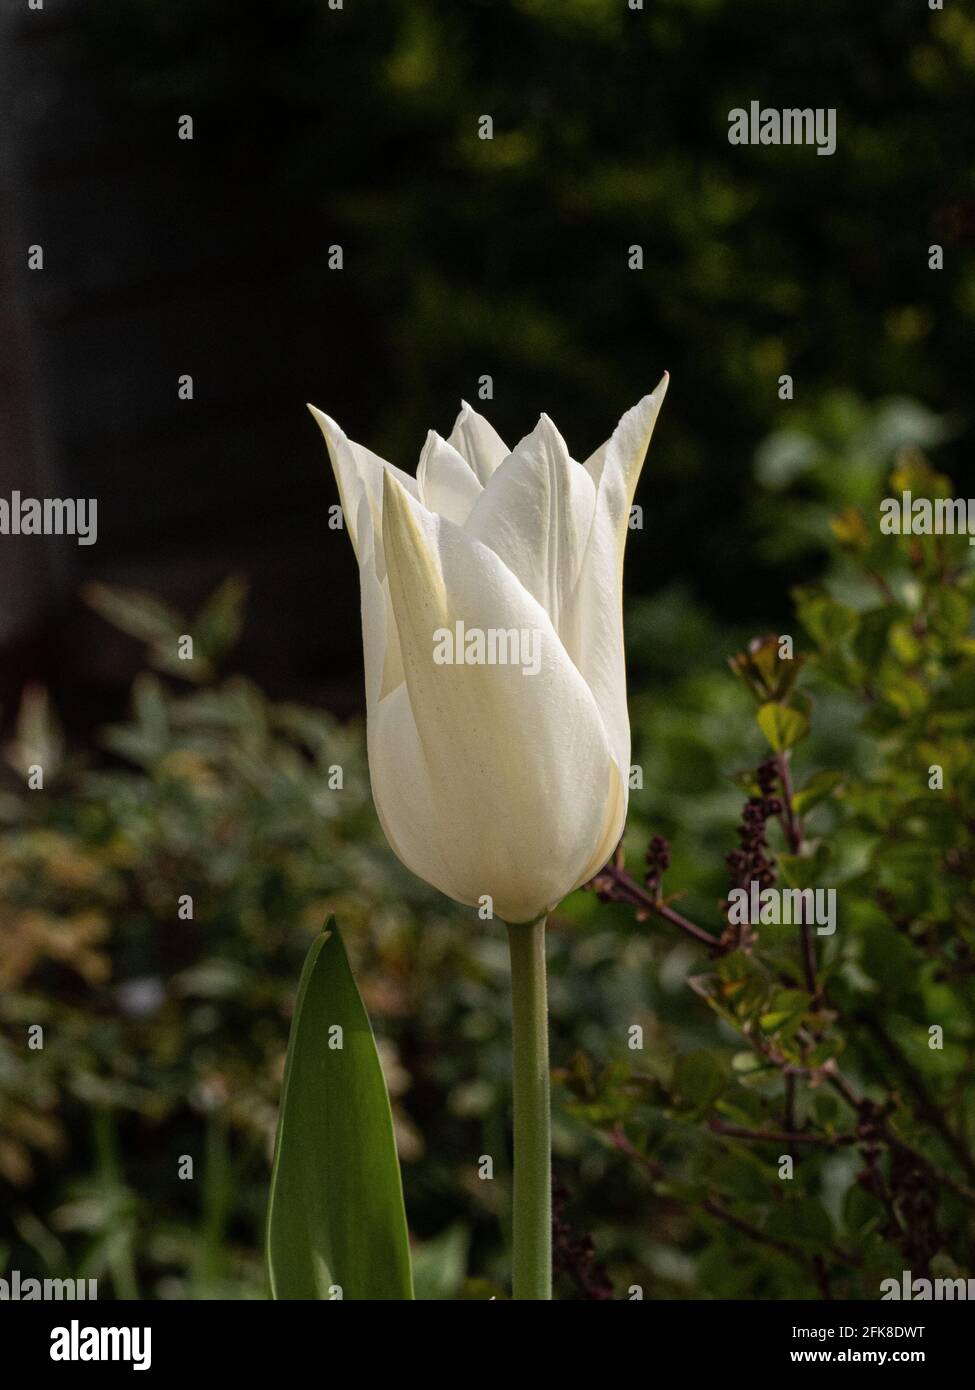 A a single stem of the clear white of the lily-flowered Tulip White Triumphator Stock Photo